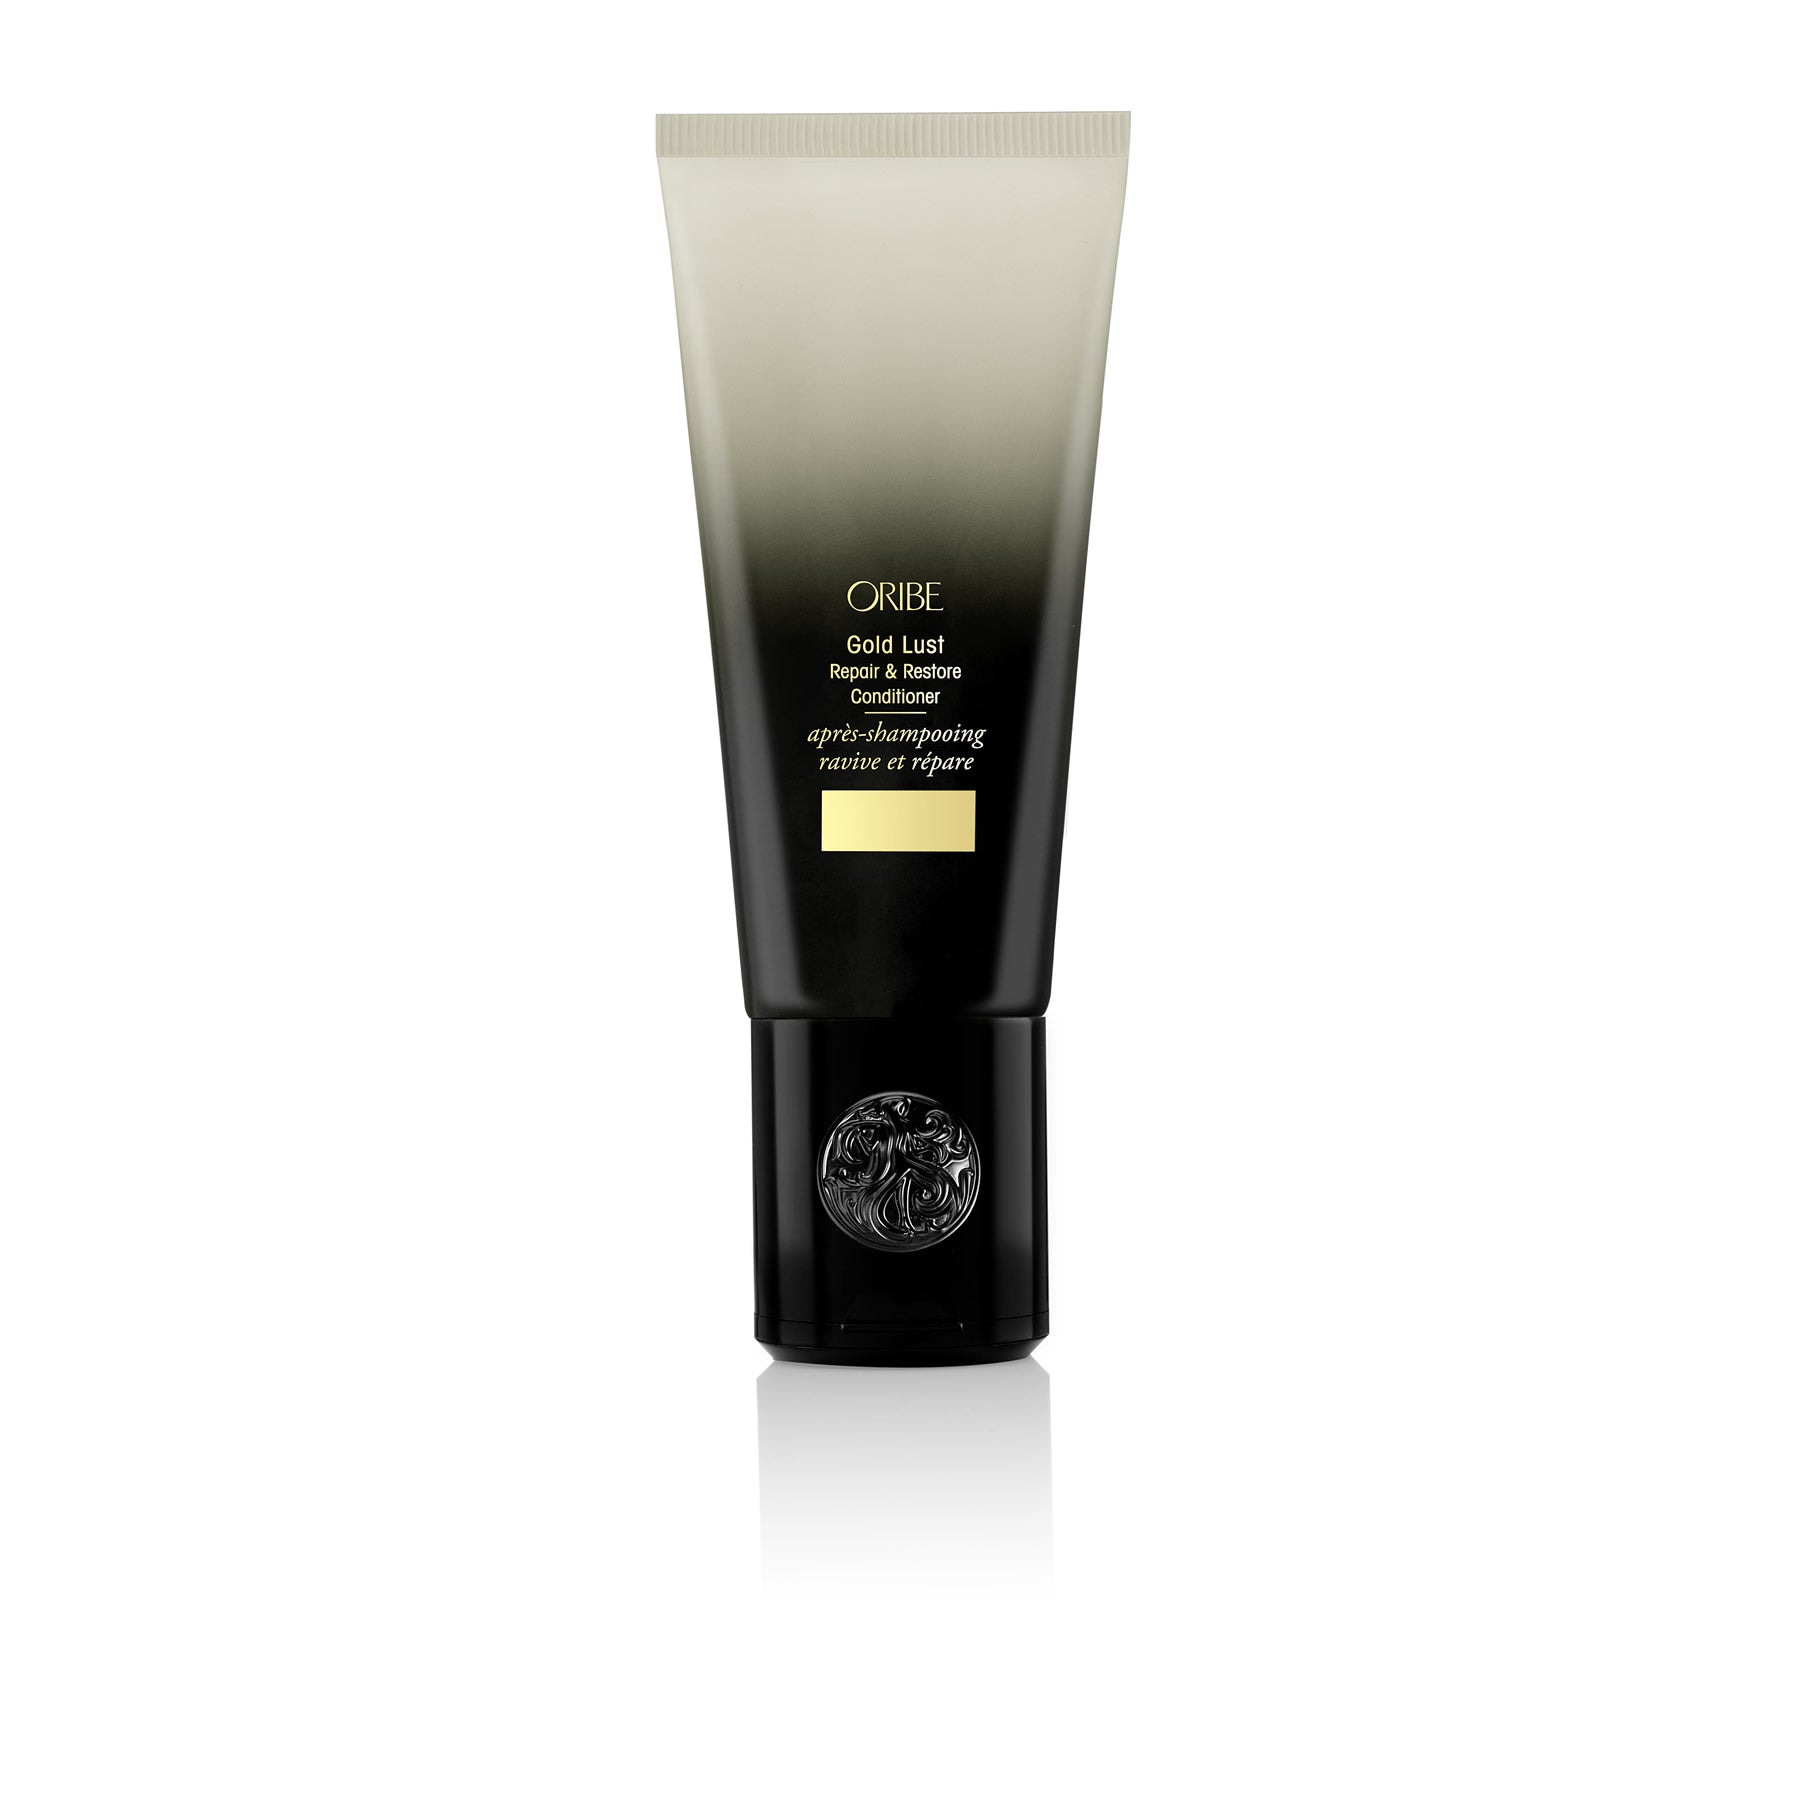 Gold Lust Repair & Restore Conditioner by Oribe